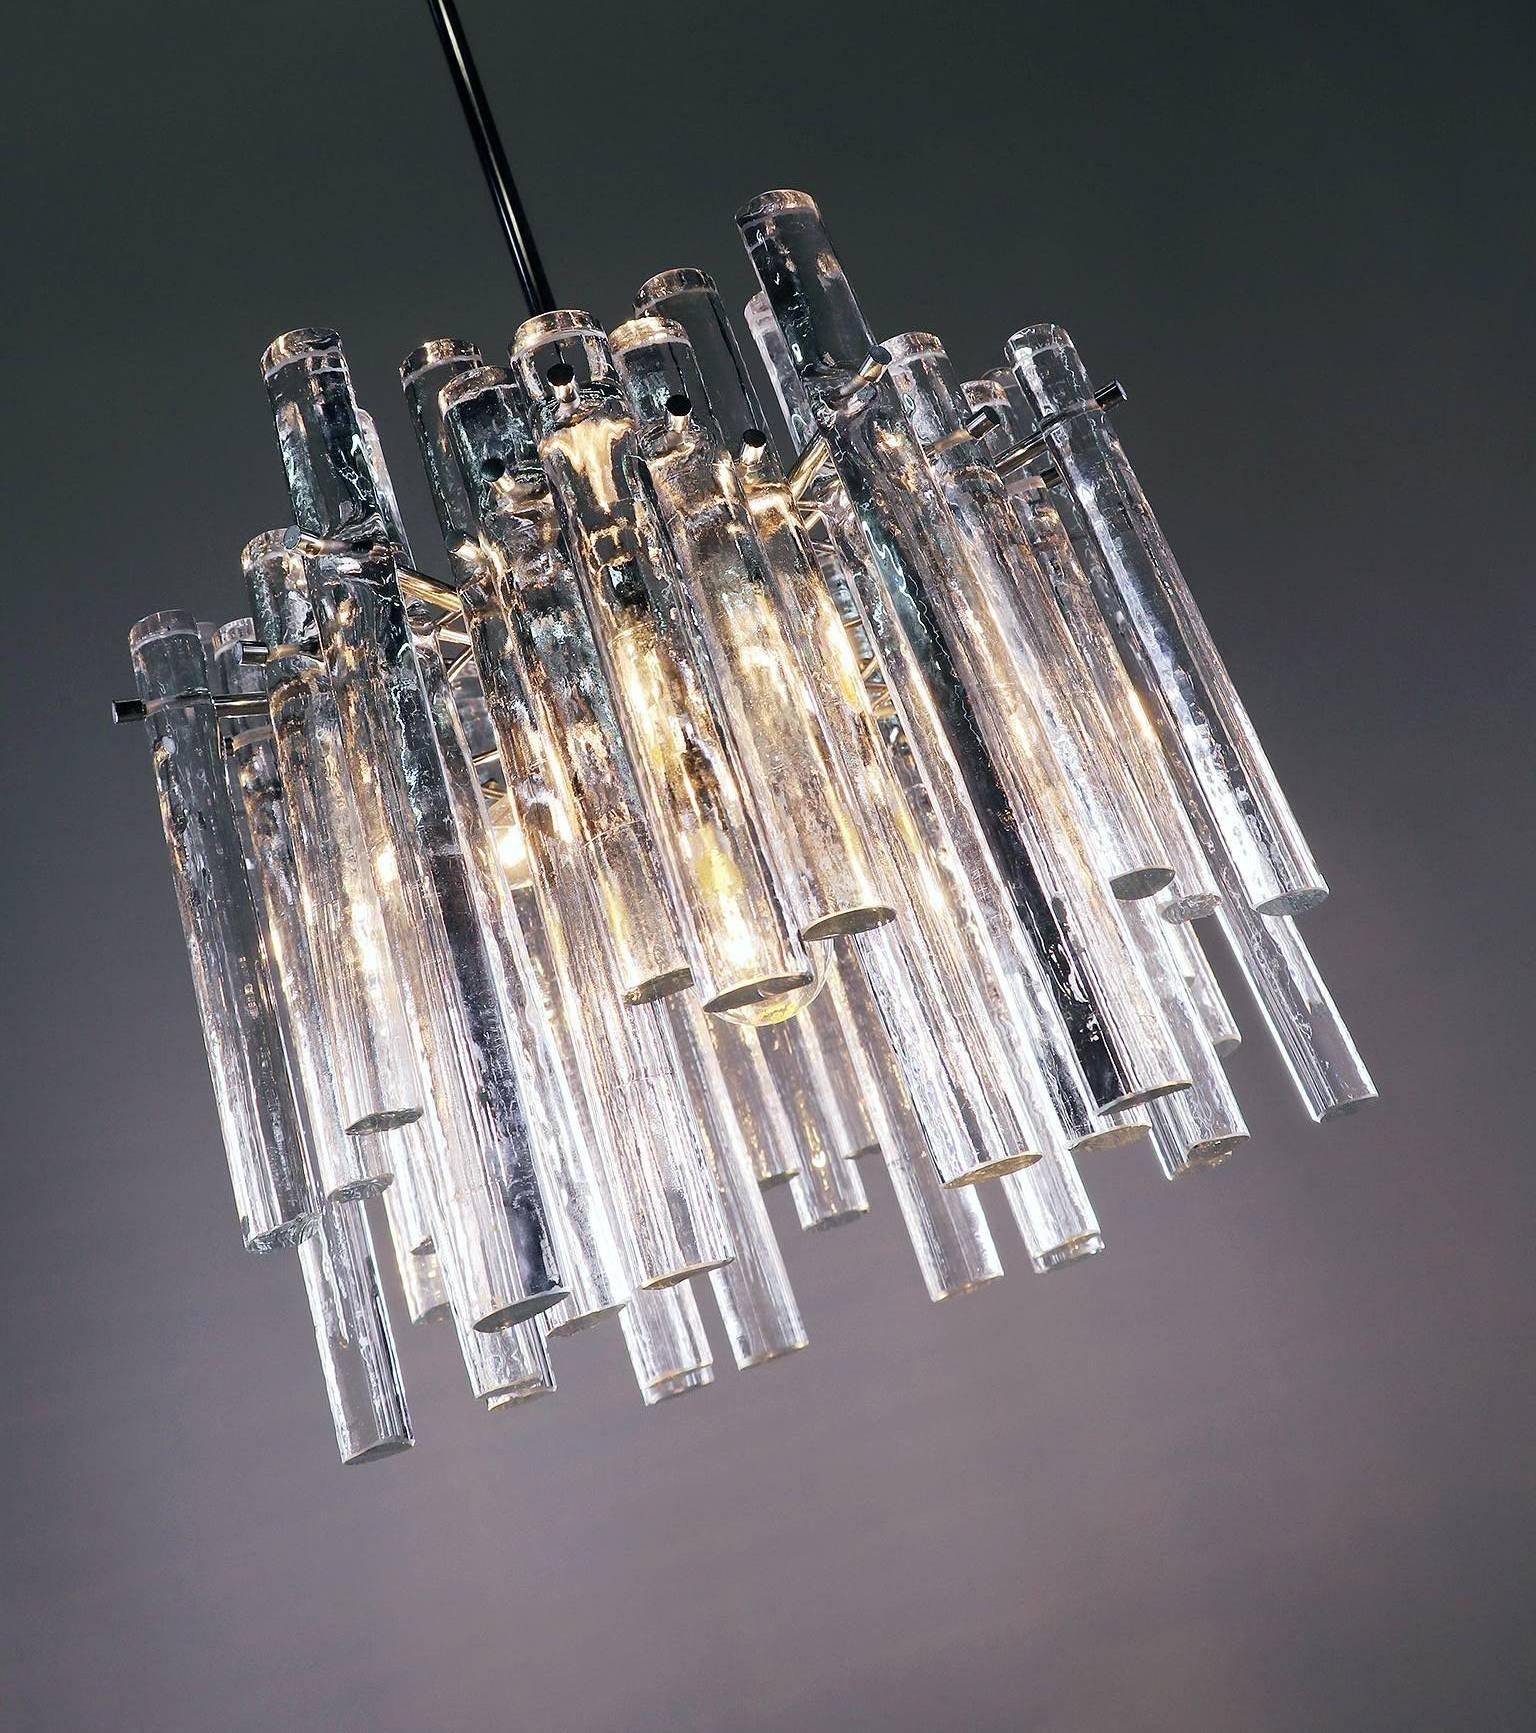 Elegant chandelier with crystal glass rods like iced sticks of various lengths on a chrome metal frame. Manufactured by Kinkeldey, Germany in the 1960s. 

Adjustability: the bar is divided and can be adjusted as required for greater or lesser drop.